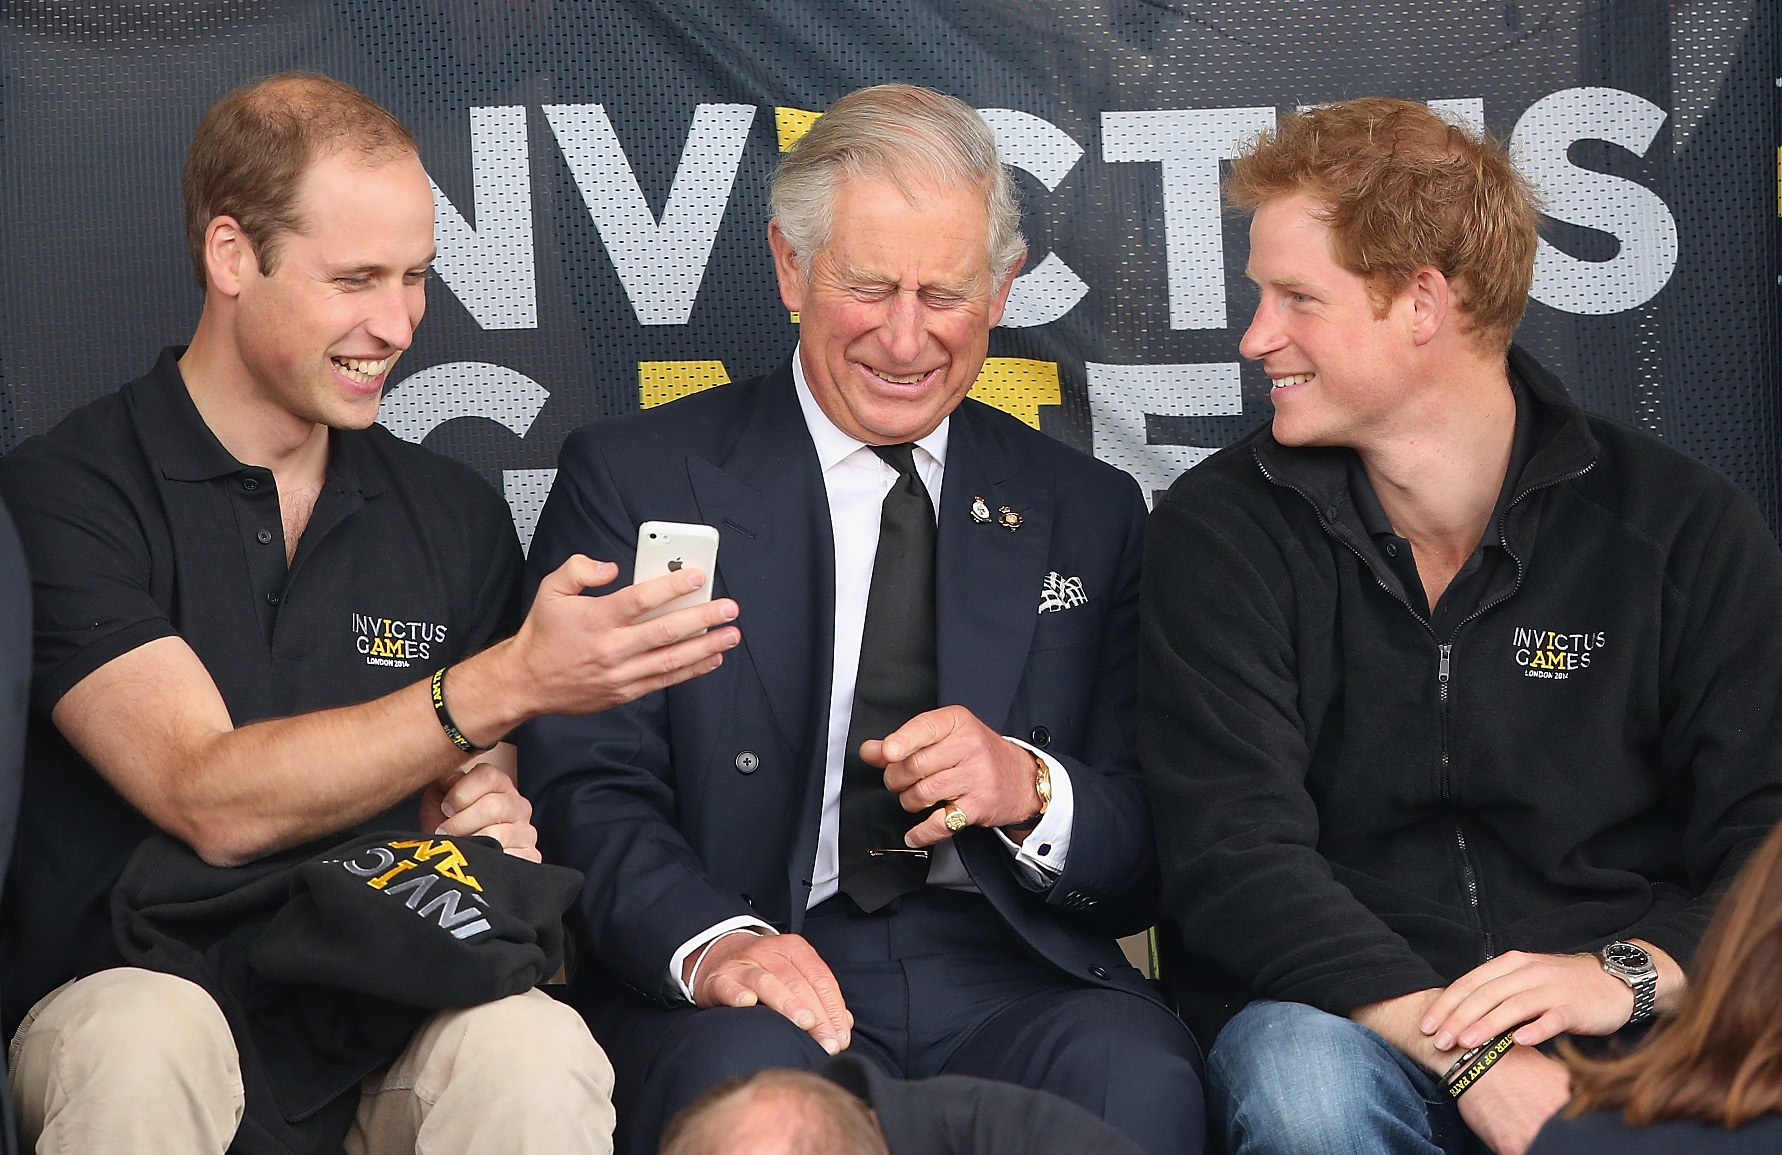 Prince William, King Charles III and Prince Harry at the athletics at Lee Valley Track during the Invictus Games on September 11, 2014 in London, England. | Source: Getty Images